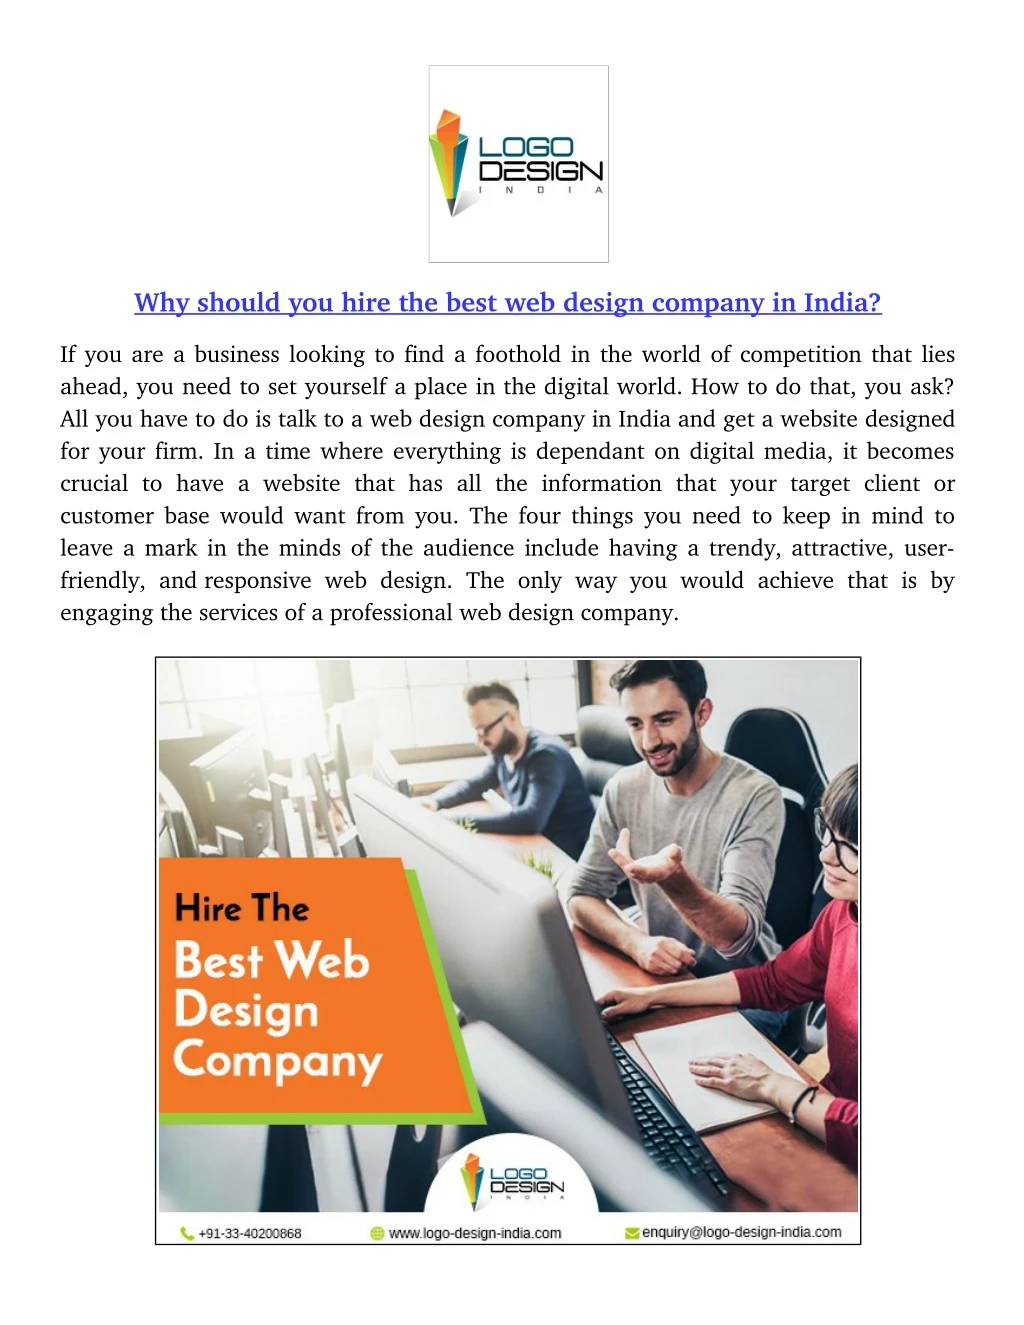 why should you hire the best web design company